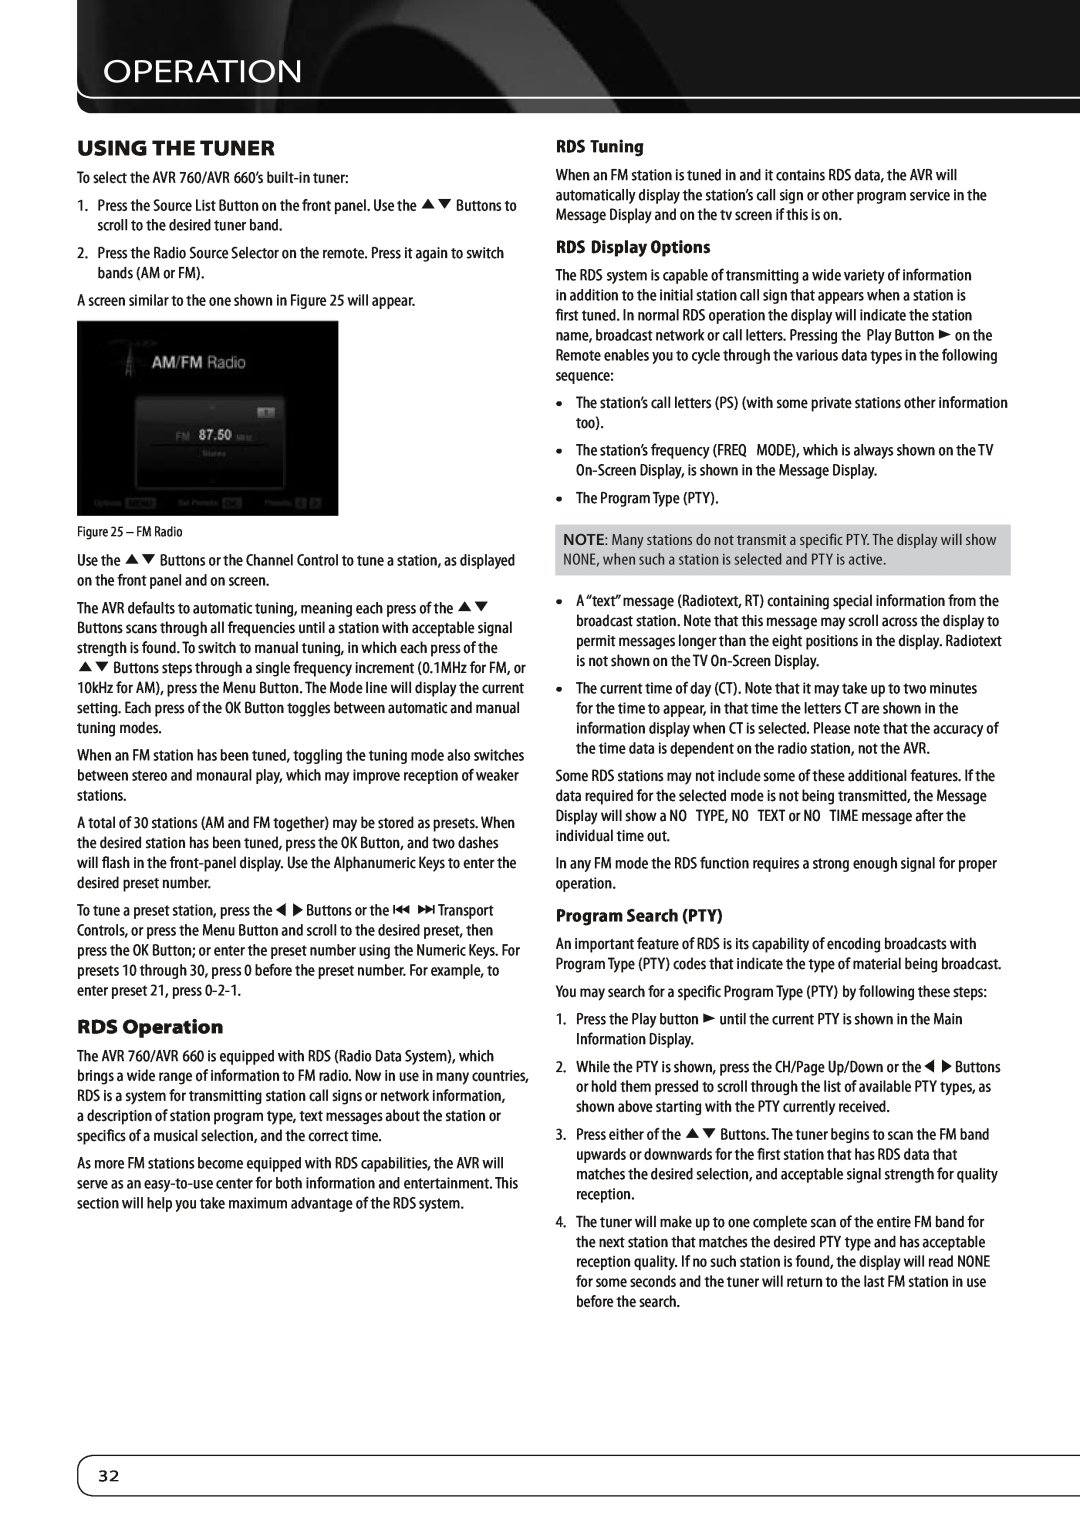 Harman-Kardon 760, 660 owner manual Using the Tuner, RDS Operation, RDS Tuning, RDS Display Options, Program Search PTY 